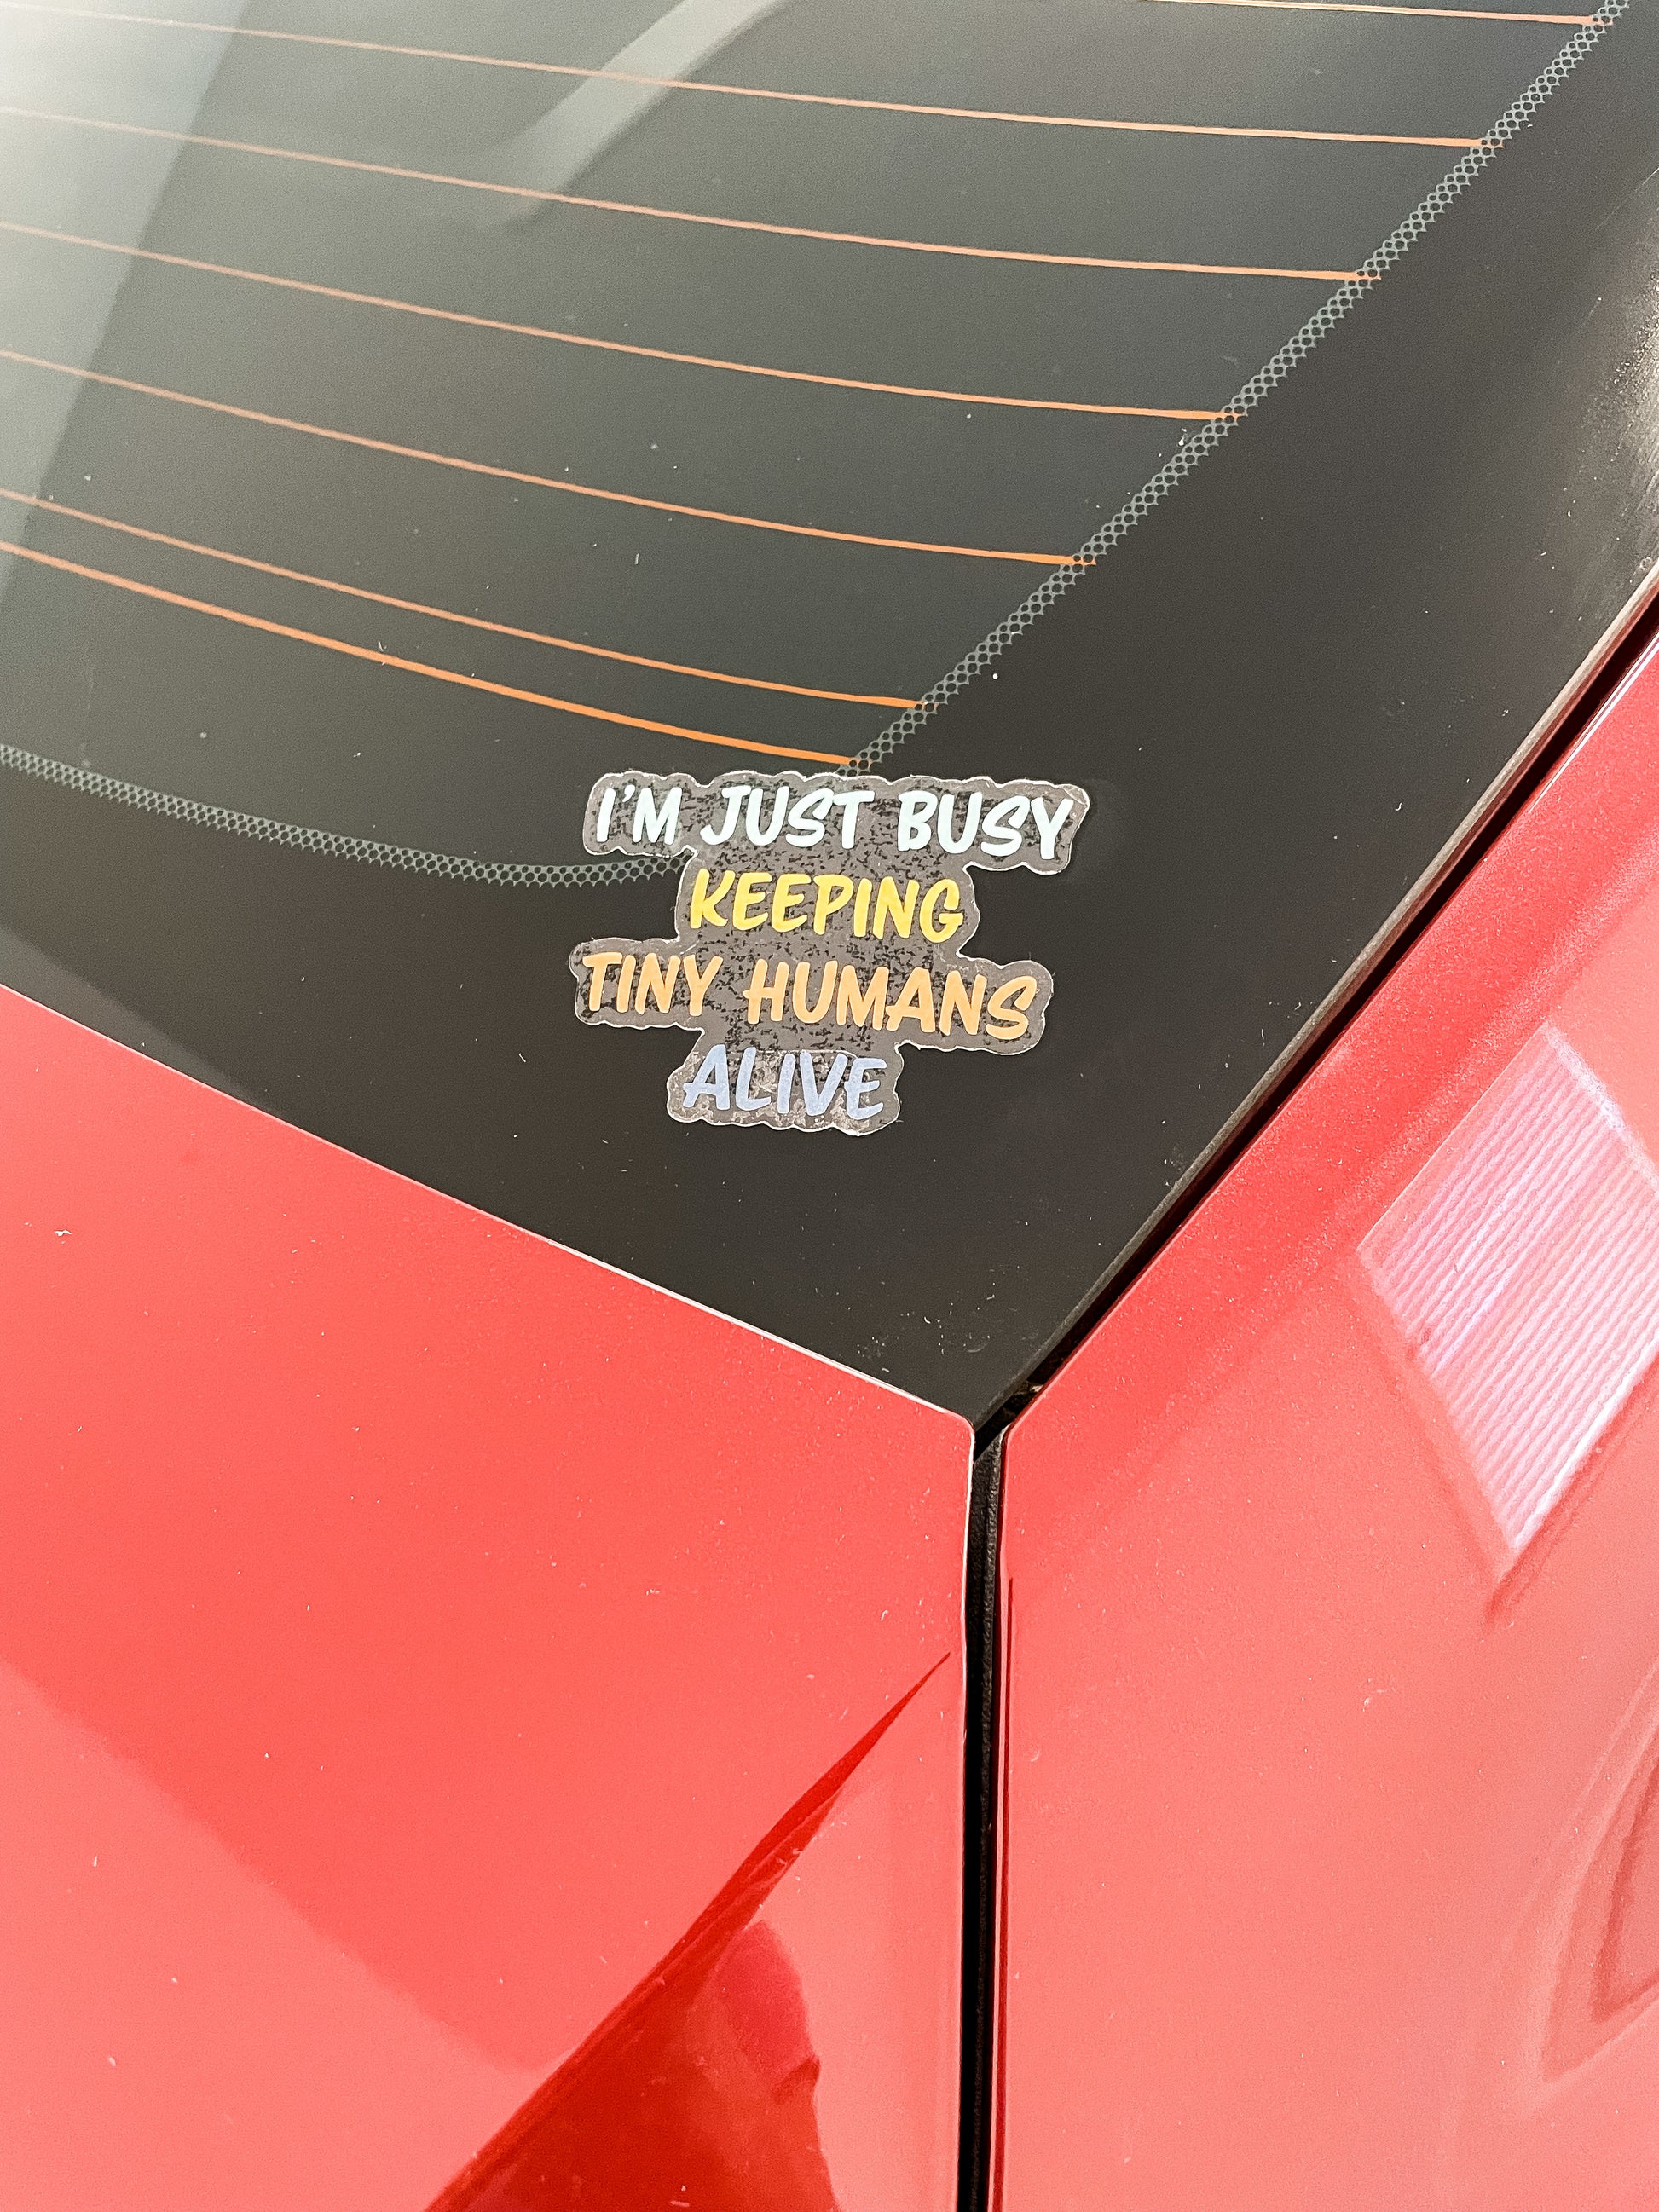 I'm just busy keeping tiny humans alive clear sticker pictured on rear car window